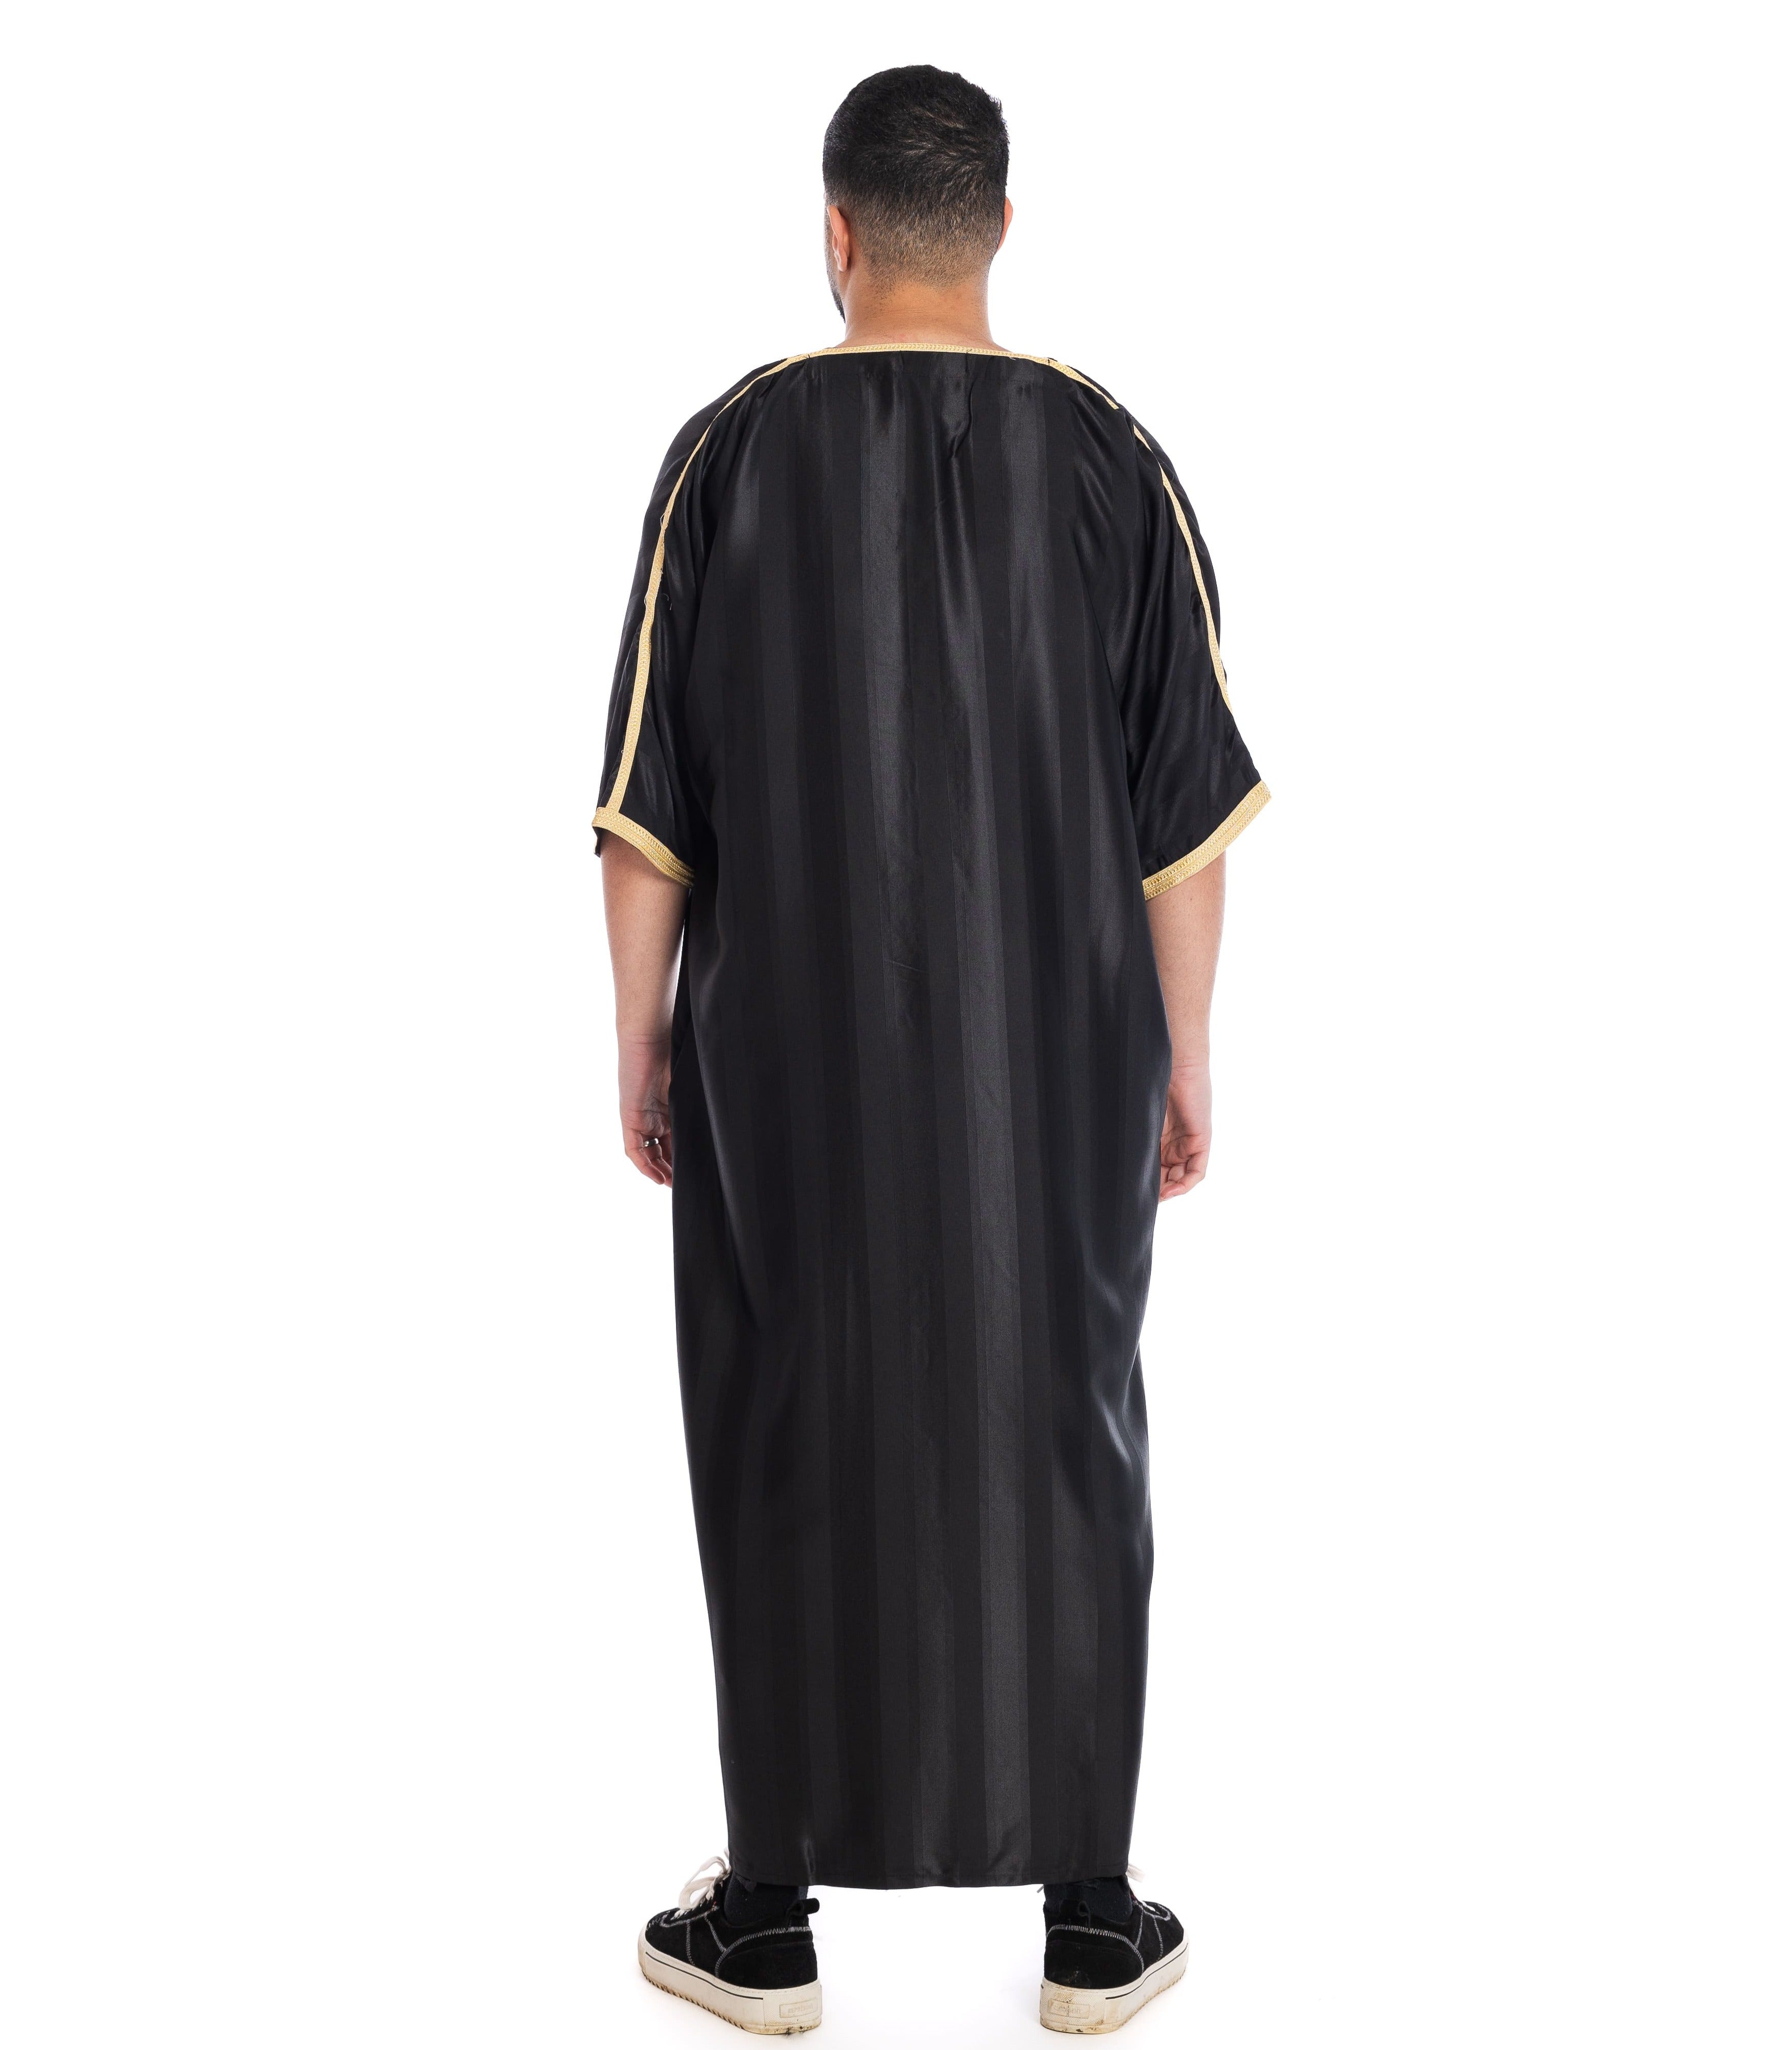 Black and Gold Shiny Jawhara moroccan Thobe Collection - newarabia Apparel &amp; Accessories